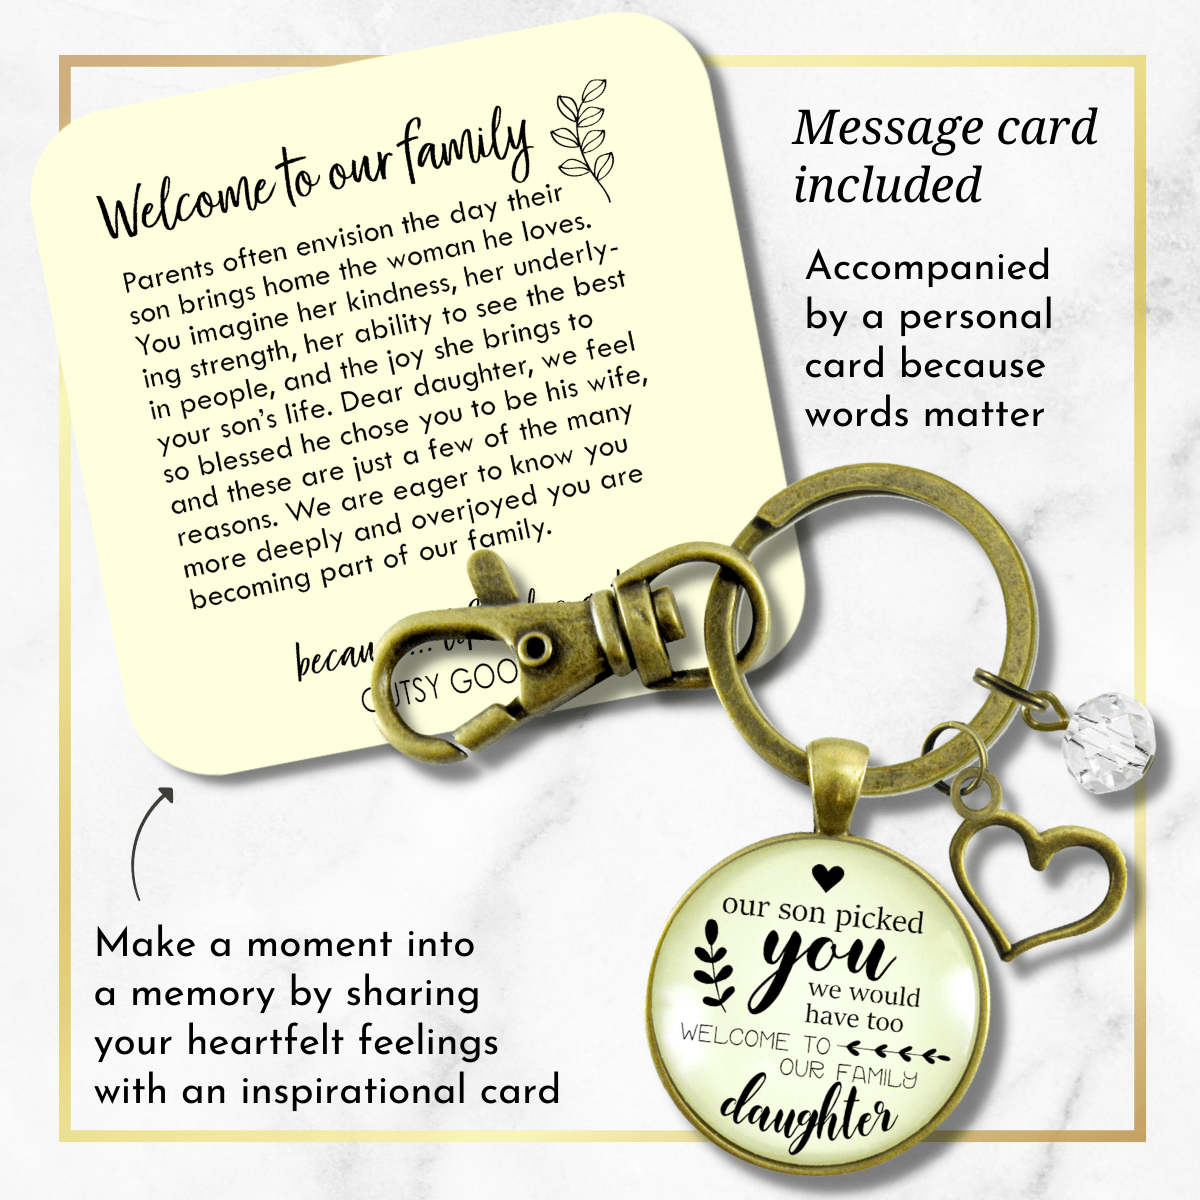 Daughter In Law Keychain Our Son Picked You Keepsake Wedding Jewelry Gift For Bride Heart - Gutsy Goodness Handmade Jewelry;Daughter In Law Keychain Our Son Picked You Keepsake Wedding Jewelry Gift For Bride Heart - Gutsy Goodness Handmade Jewelry Gifts